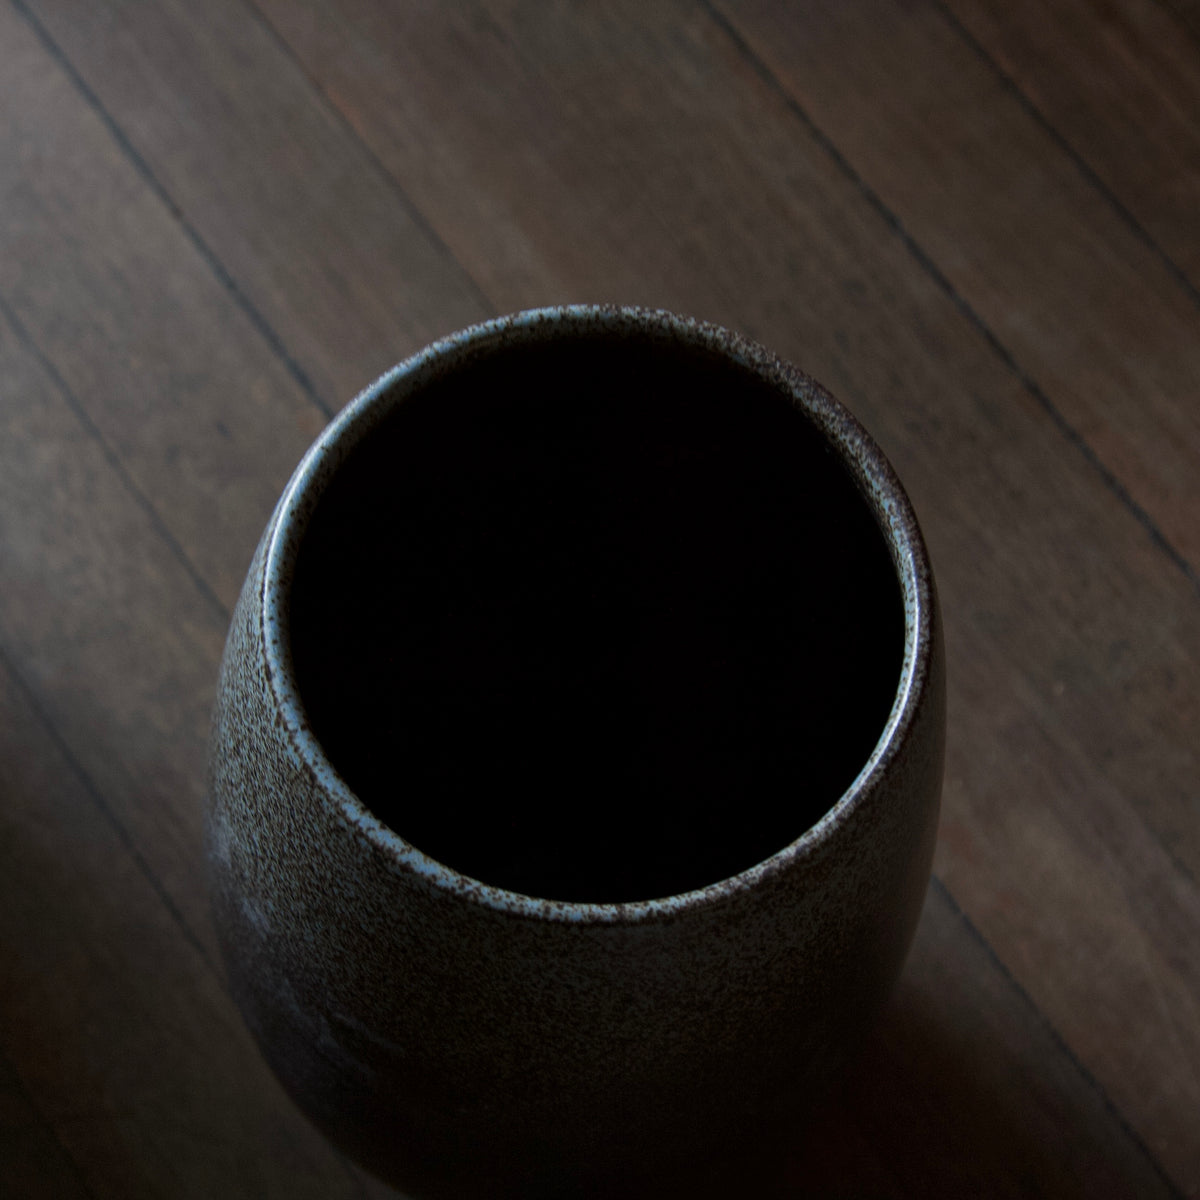 Tall Ovoid Vase / Speckled Blue and Grey Glaze